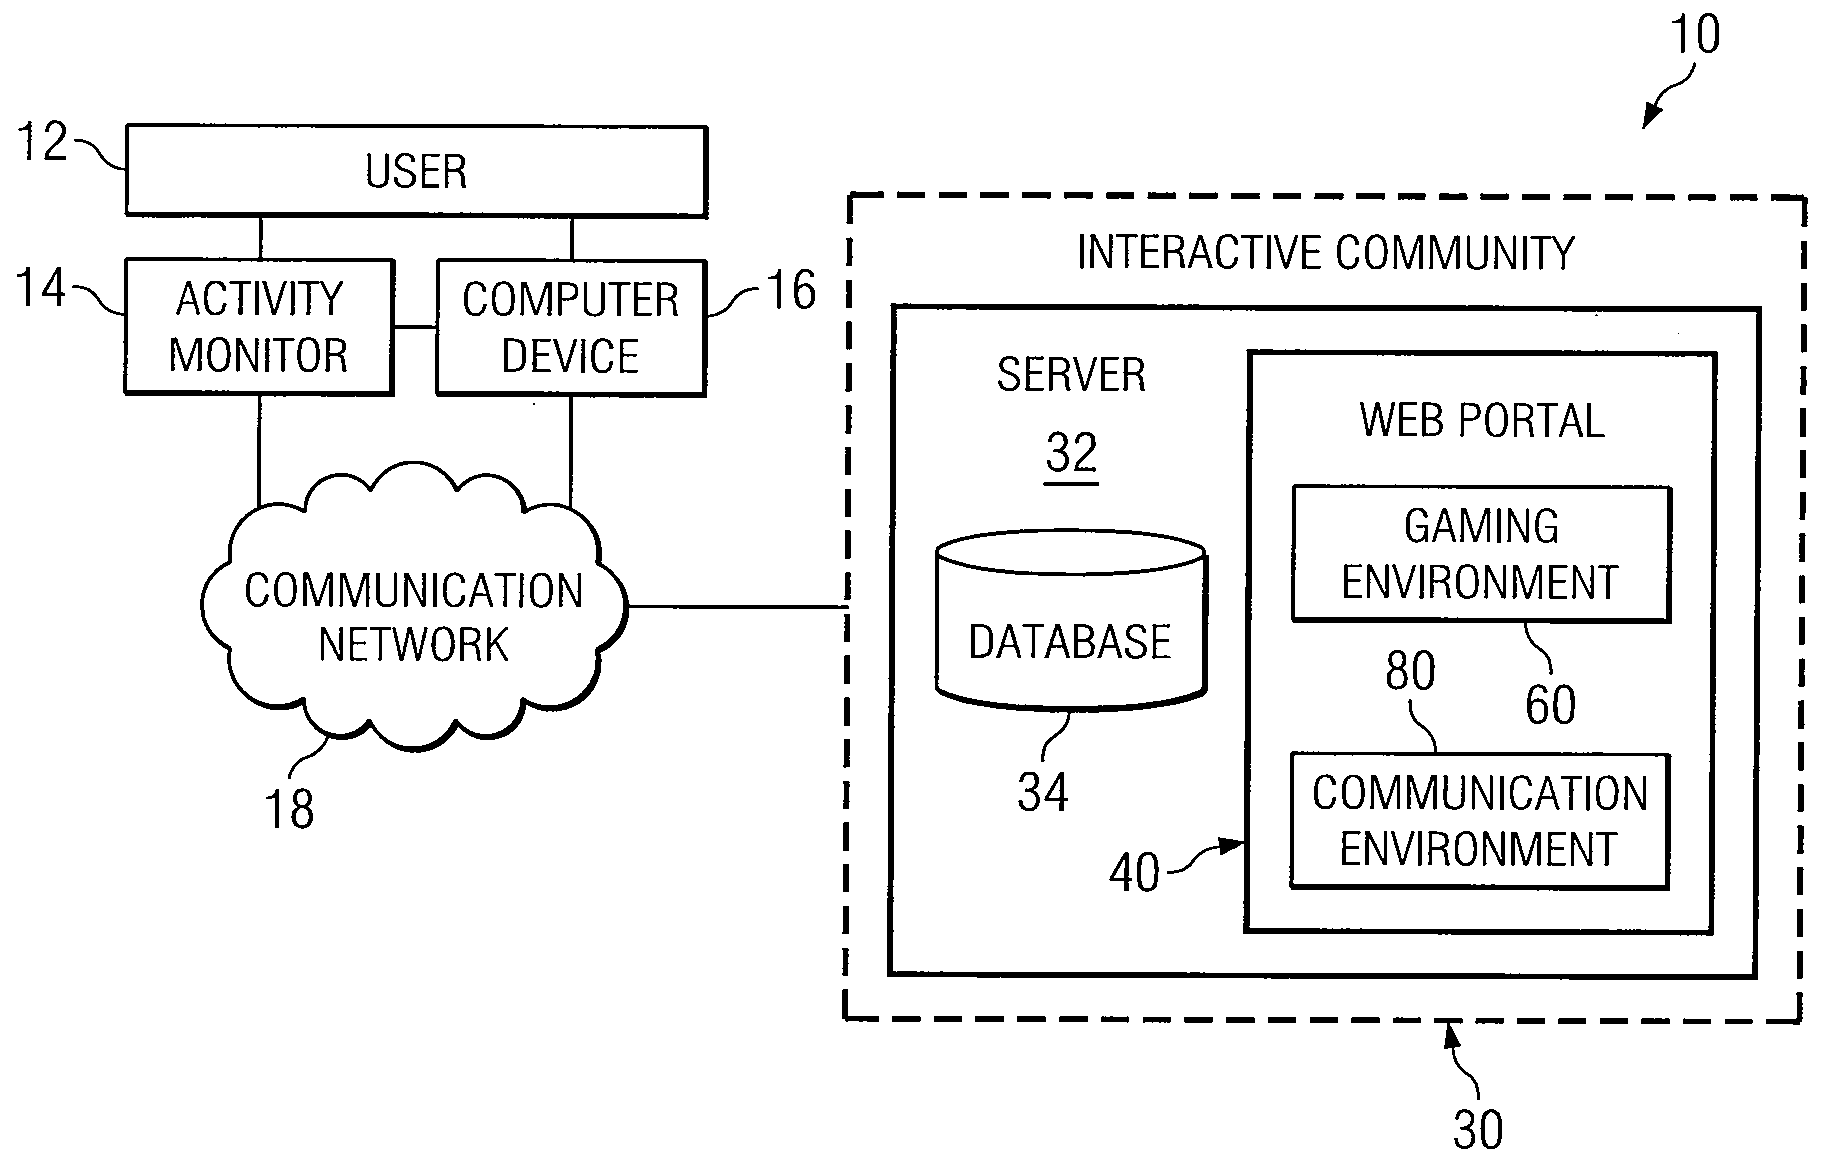 System and Method for Implementing an Interactive Online Community Utilizing an Activity Monitor